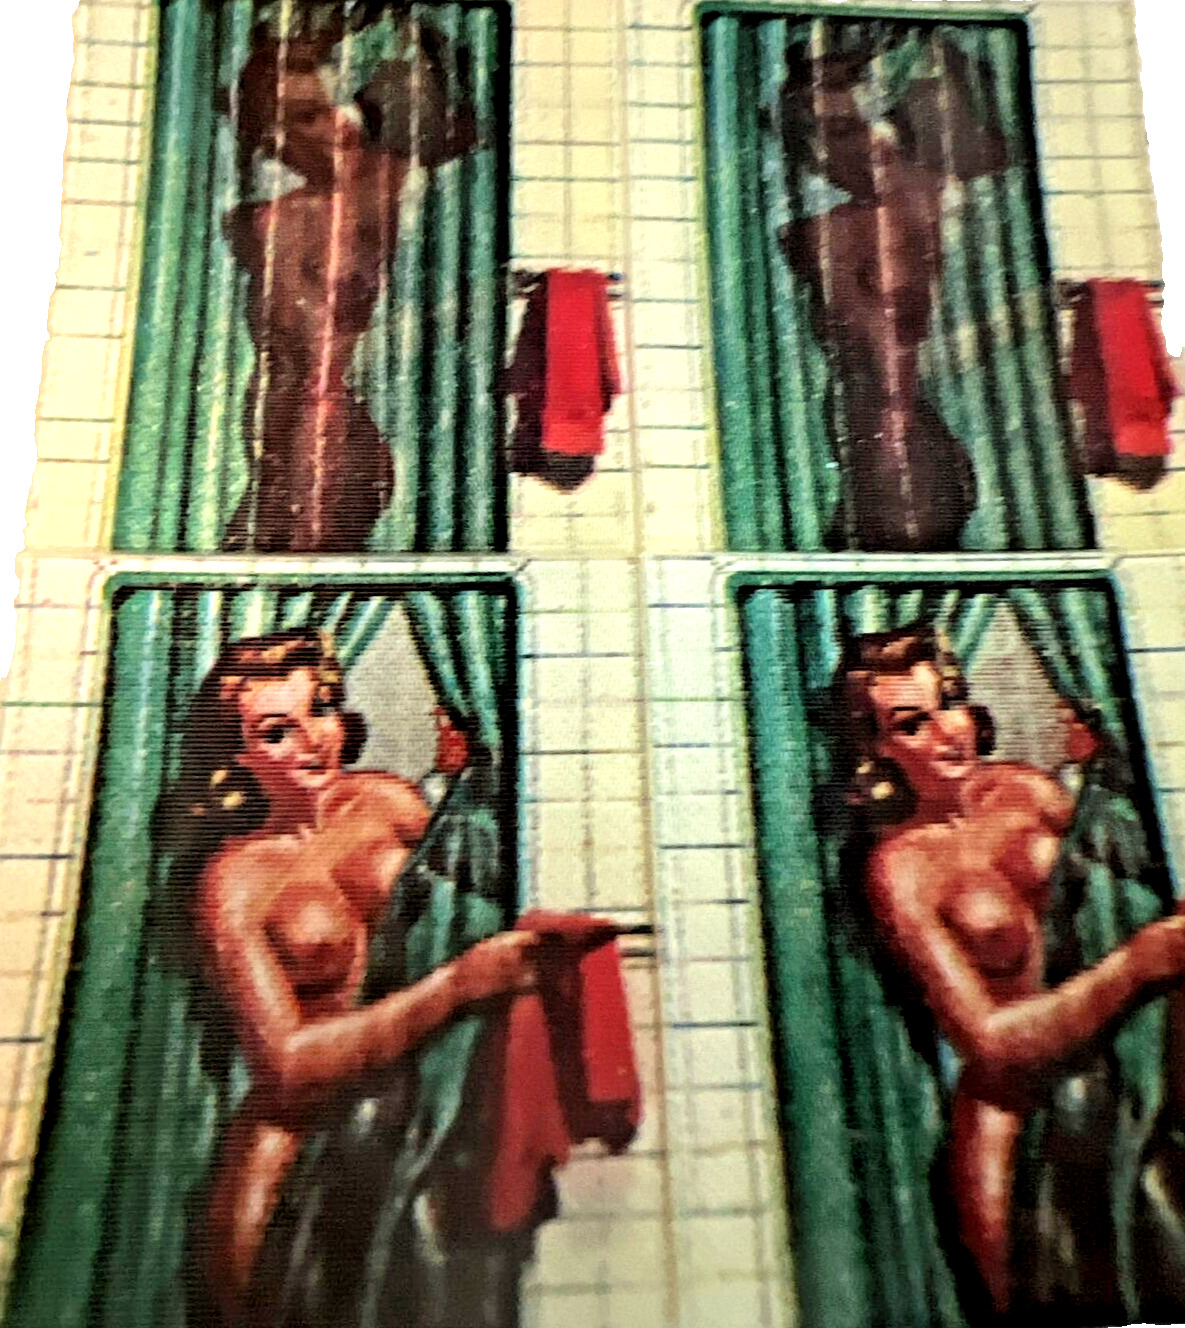 Rare Lot of 4 1960s Vari Vue Risque Pin Up SHOWER SCENE TOWEL RIGHT NOS MINT HTF